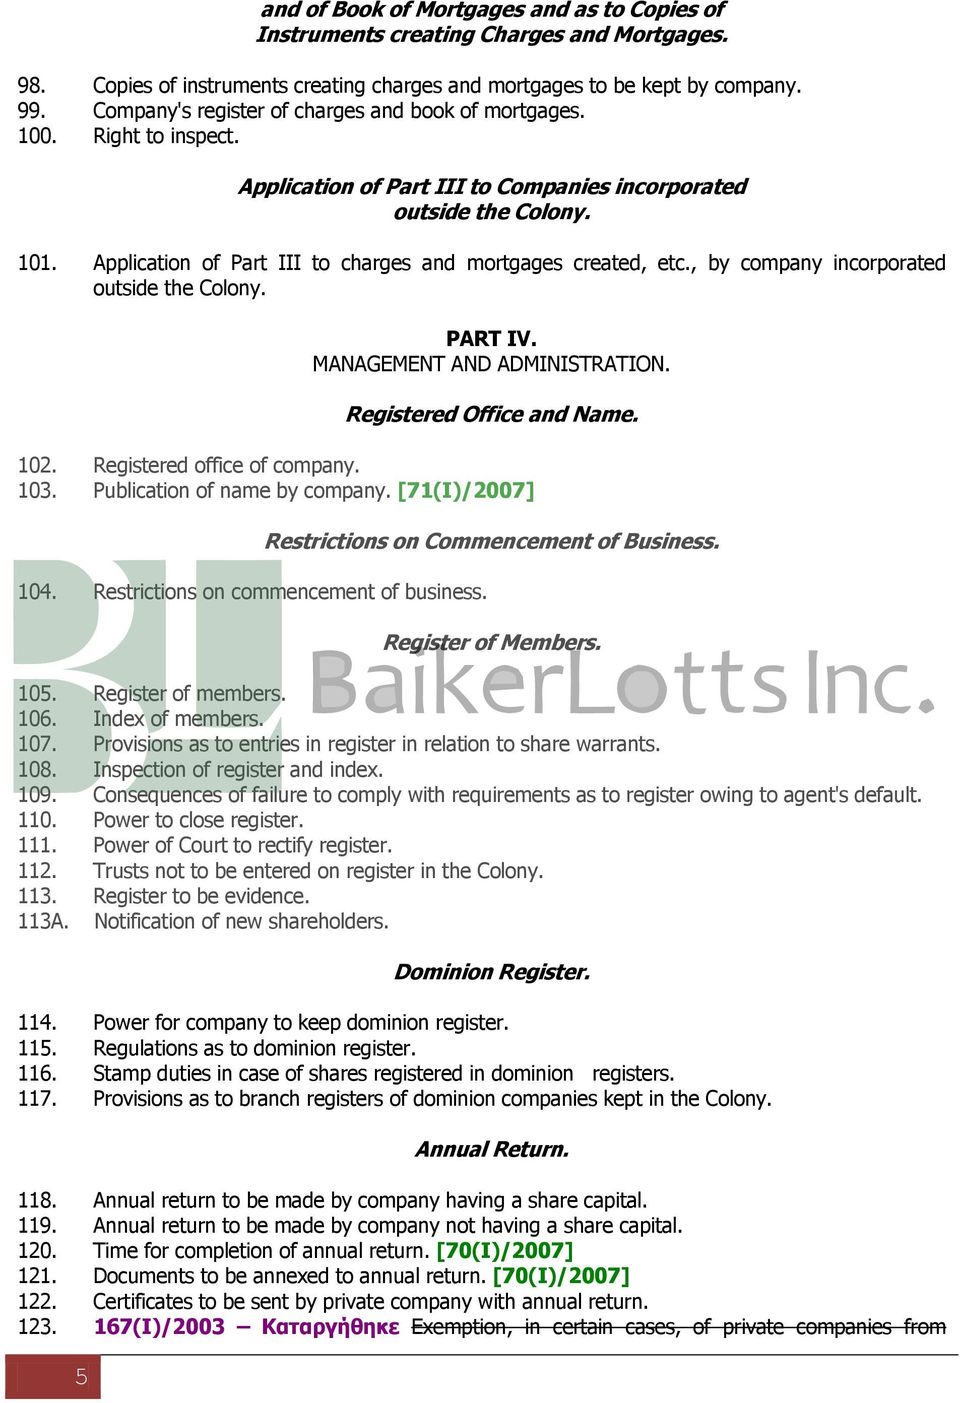 Application of Part III to charges and mortgages created, etc., by company incorporated outside the Colony. PART IV. MANAGEMENT AND ADMINISTRATION. Registered Office and Name. 102.